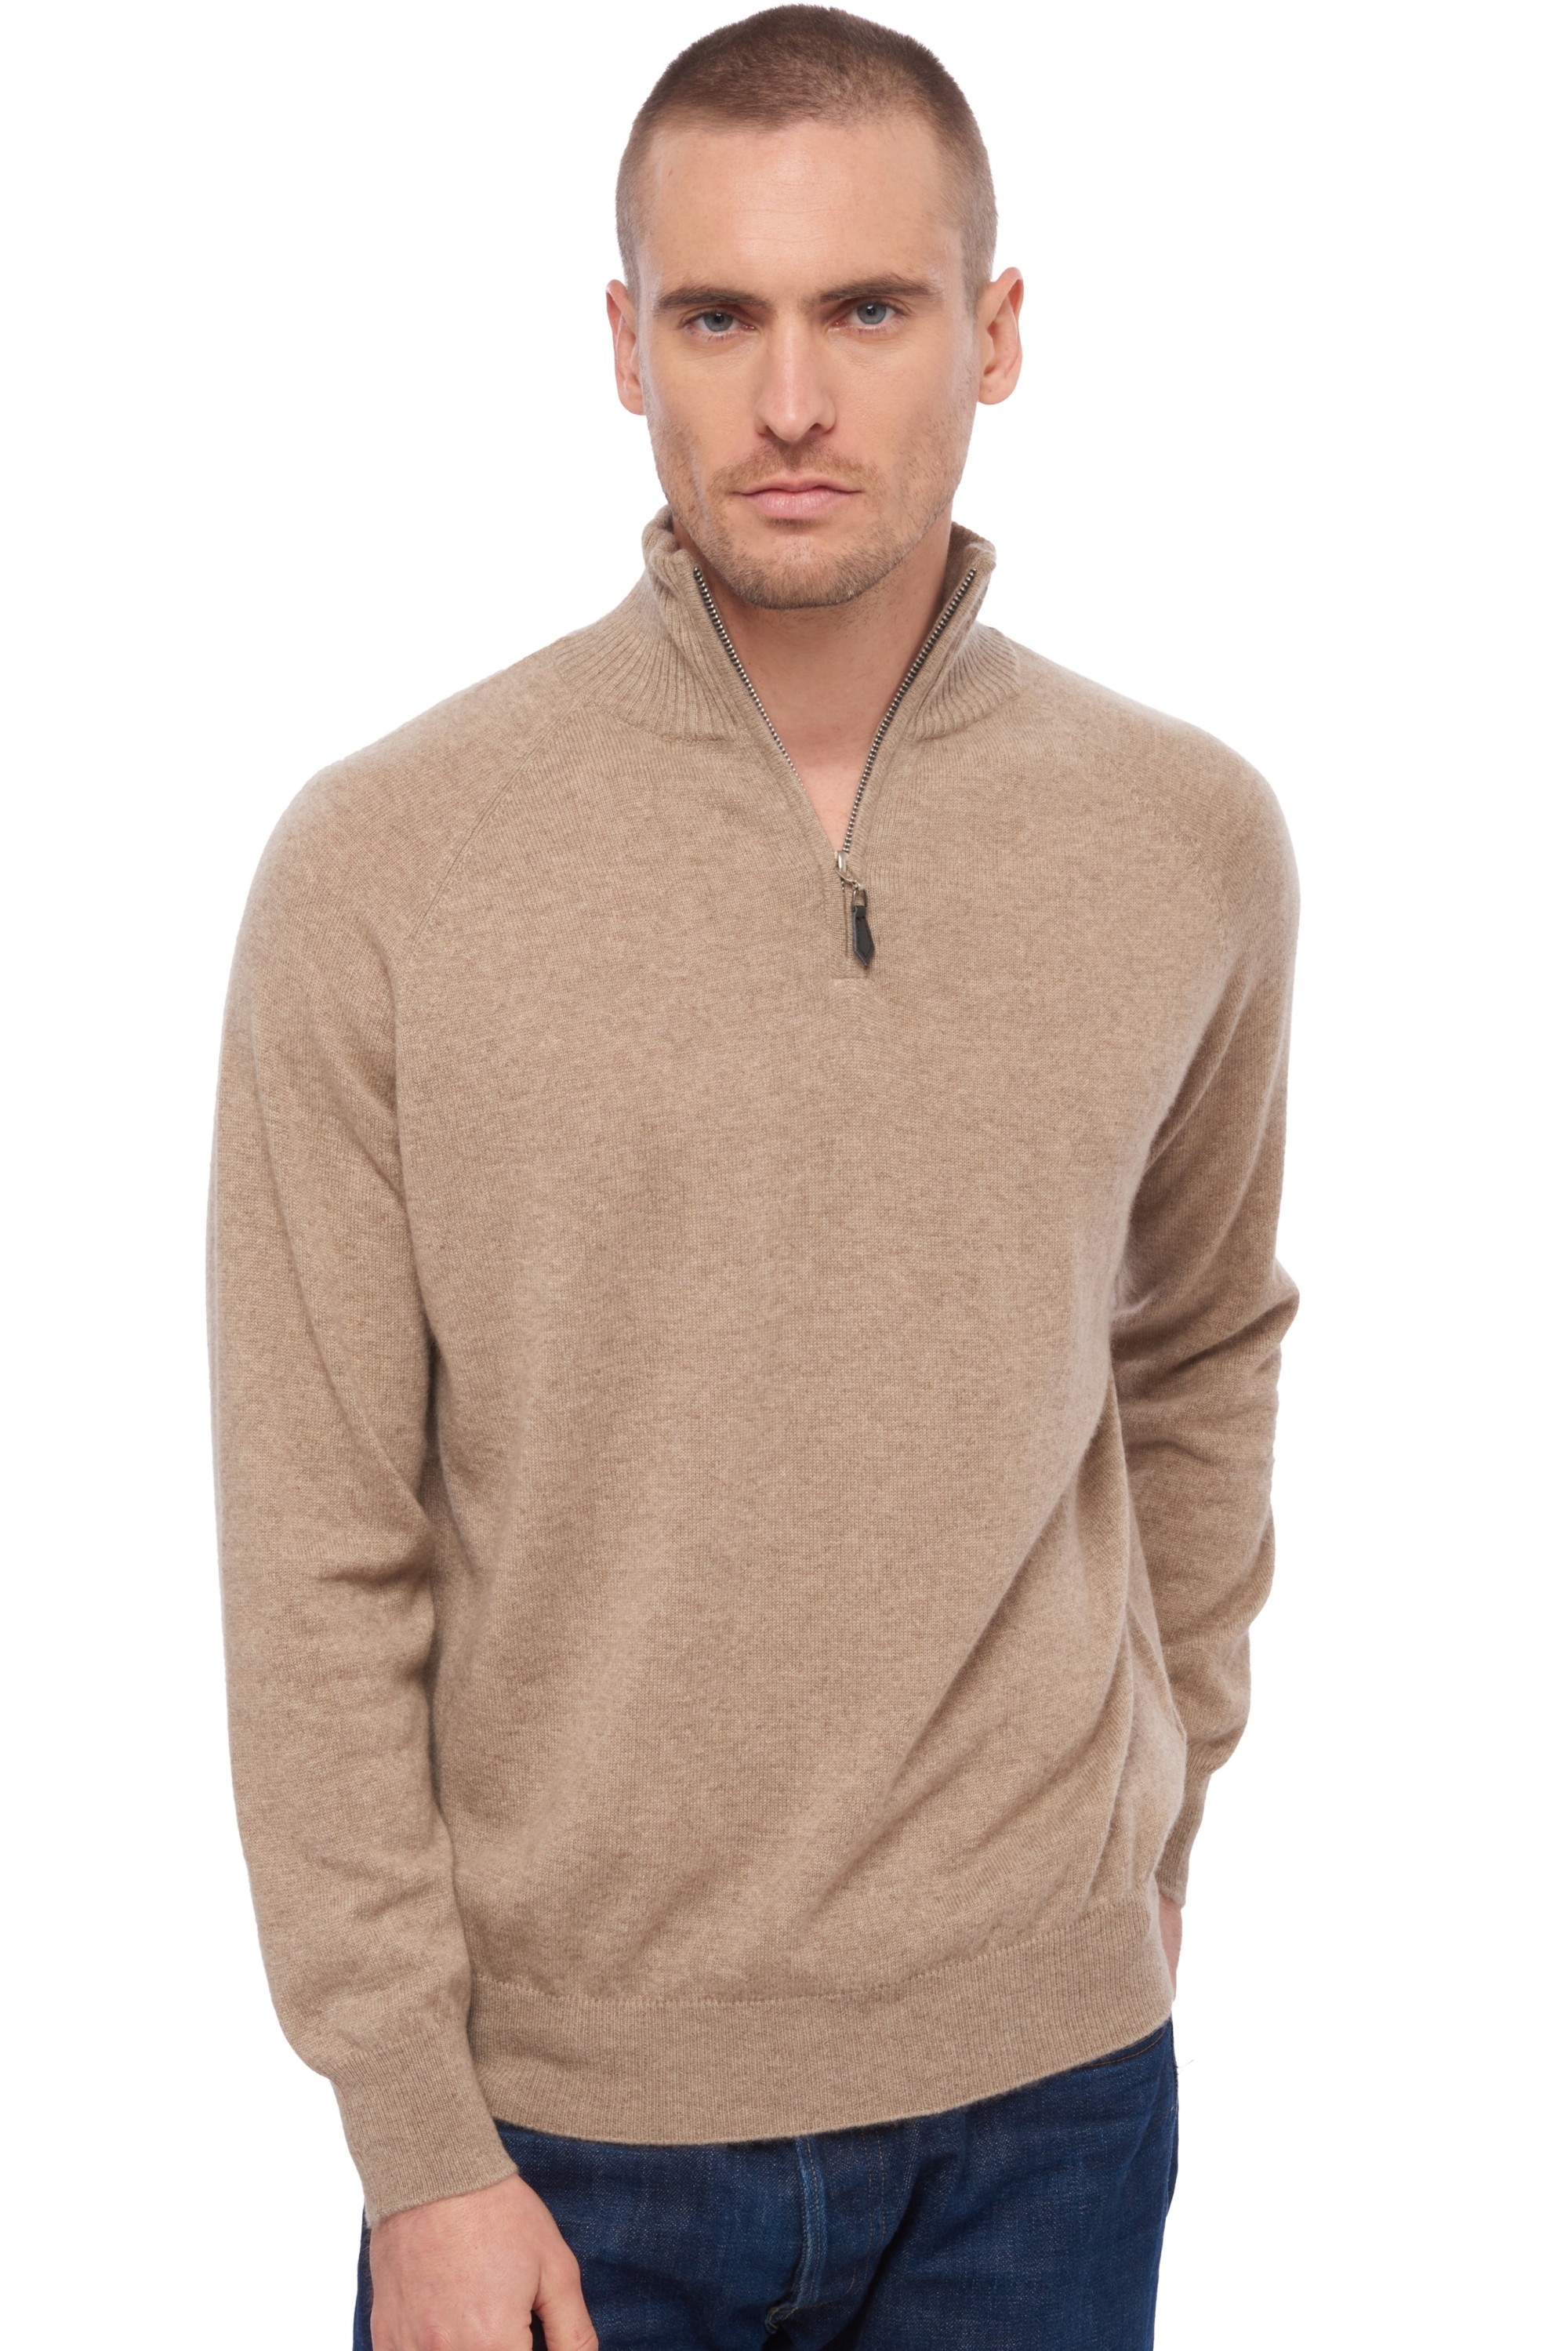 Cashmere men polo style sweaters natural vez natural brown m